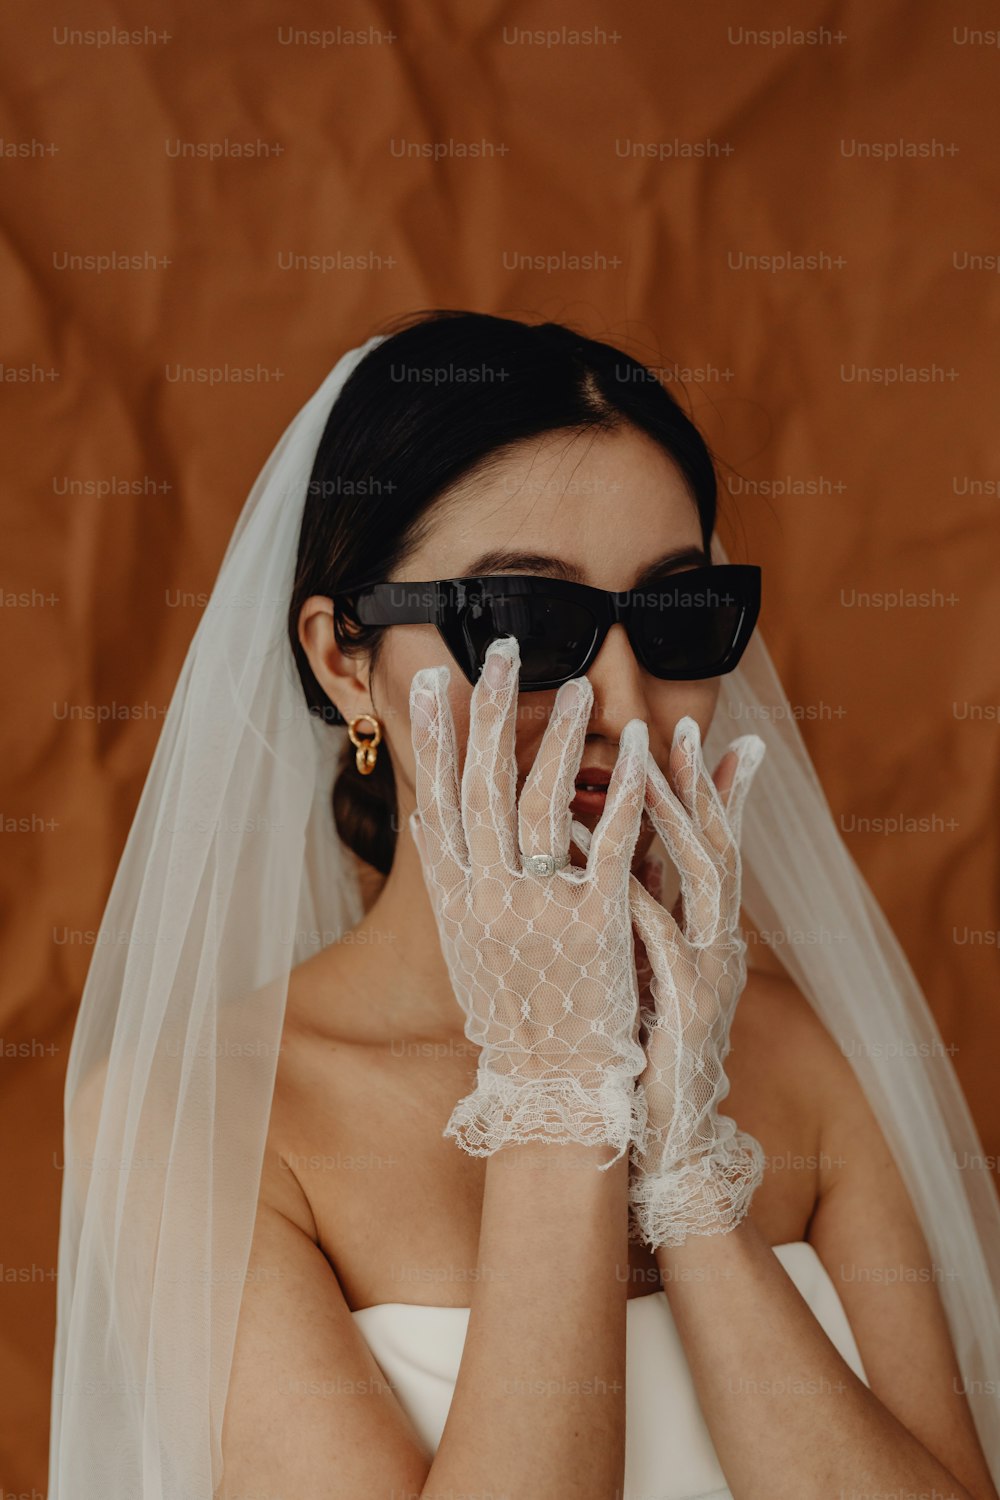 a woman wearing white gloves and a veil